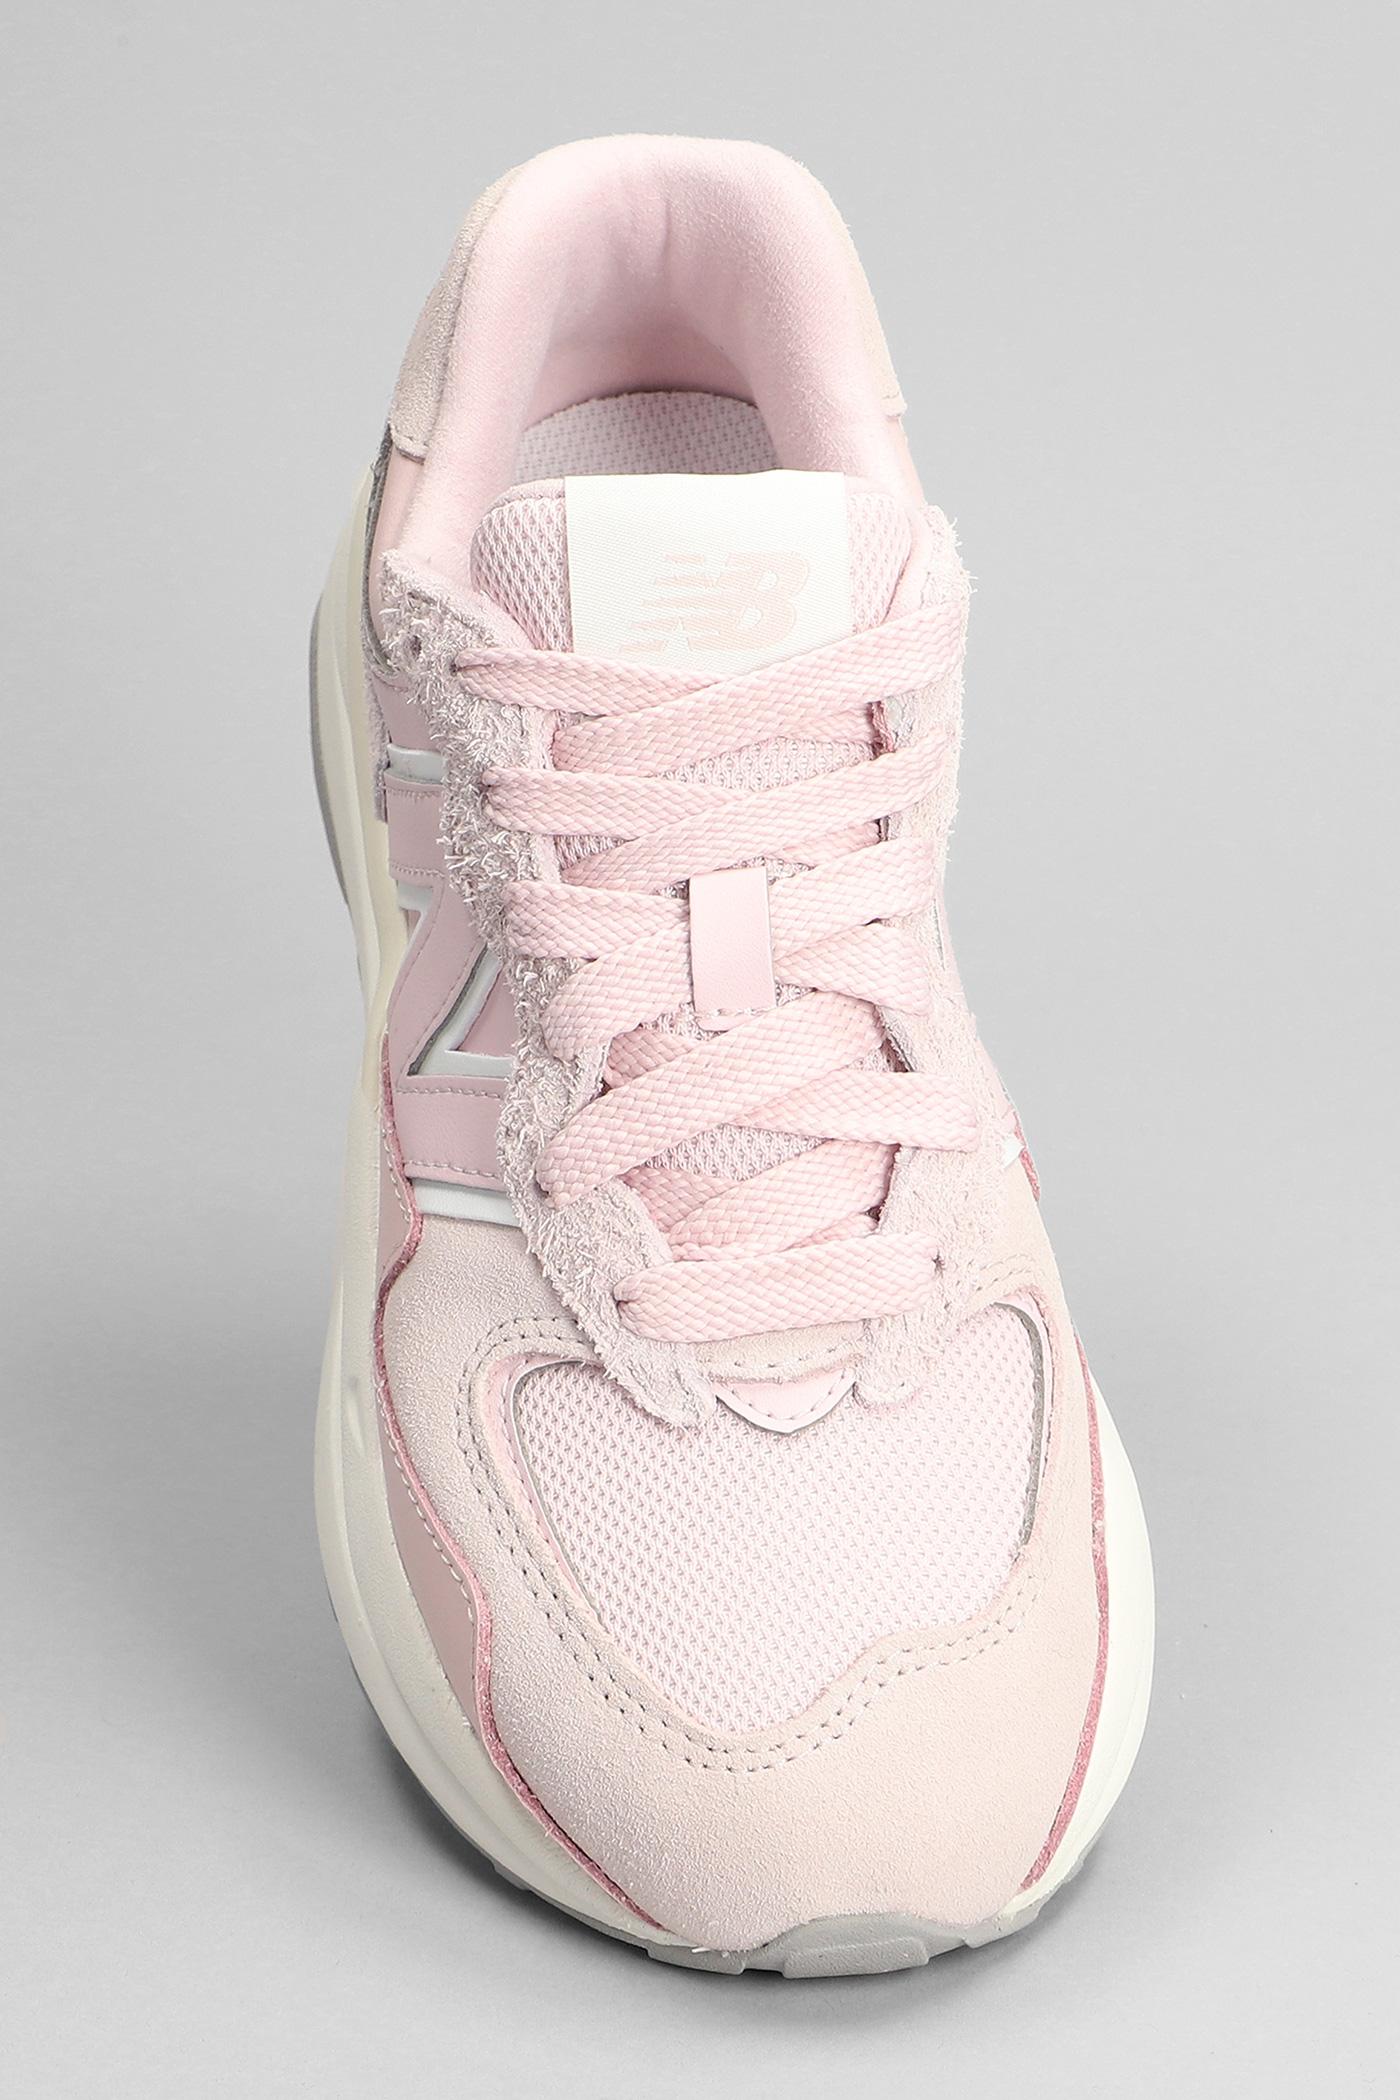 New Balance 5740 Sneakers In Rose-pink Suede And Fabric | Lyst